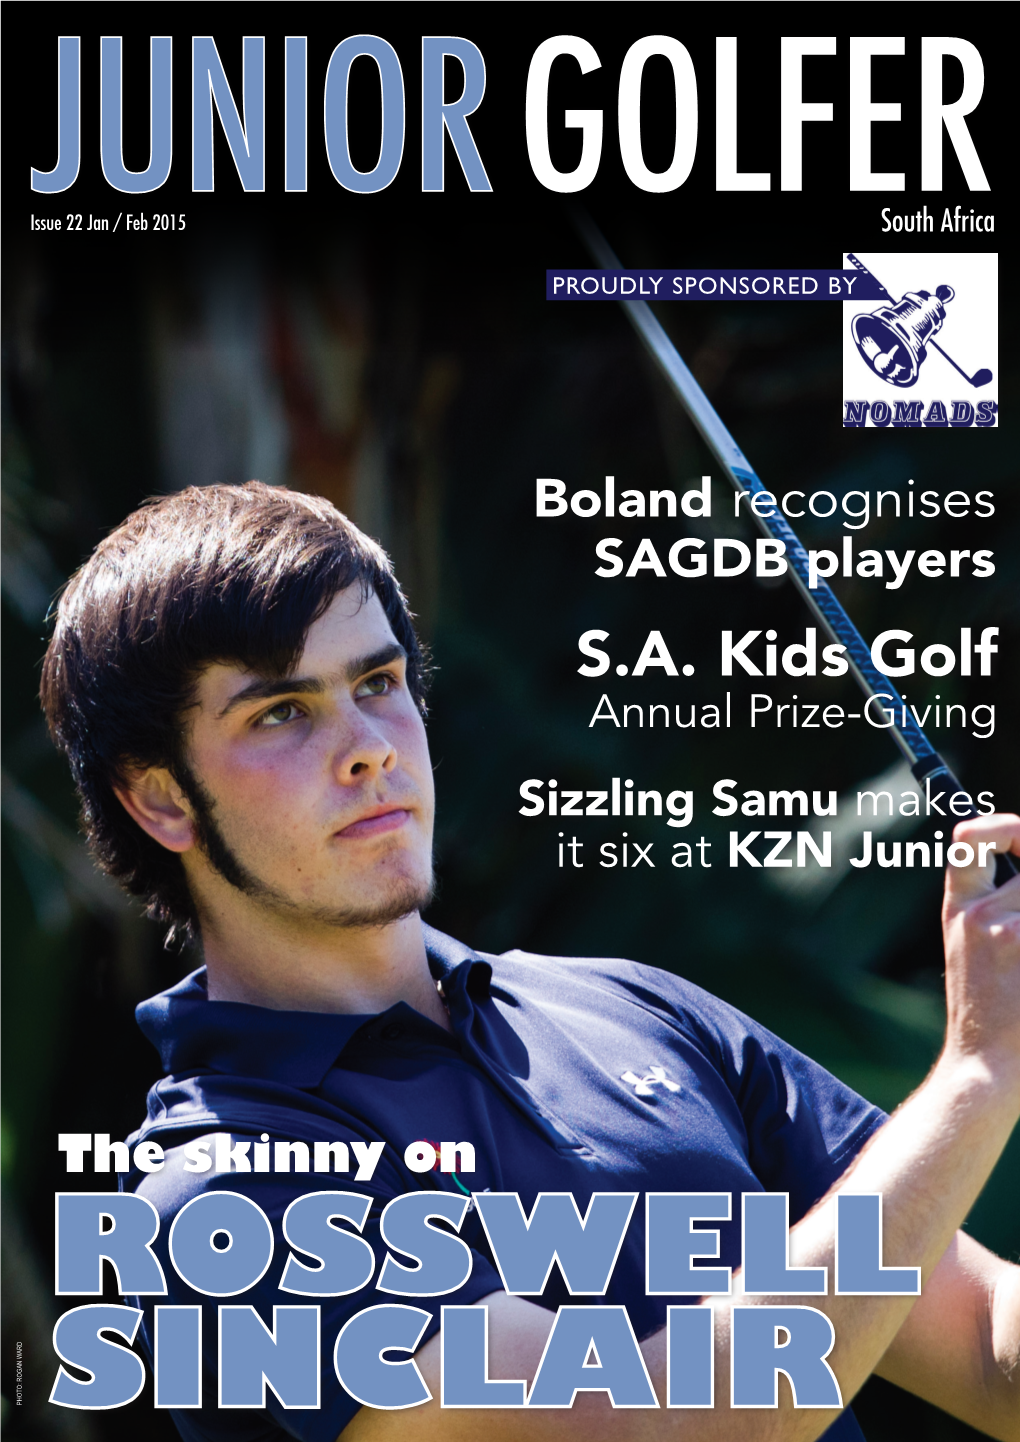 S.A. Kids Golf Annual Prize-Giving Sizzling Samu Makes It Six at KZN Junior